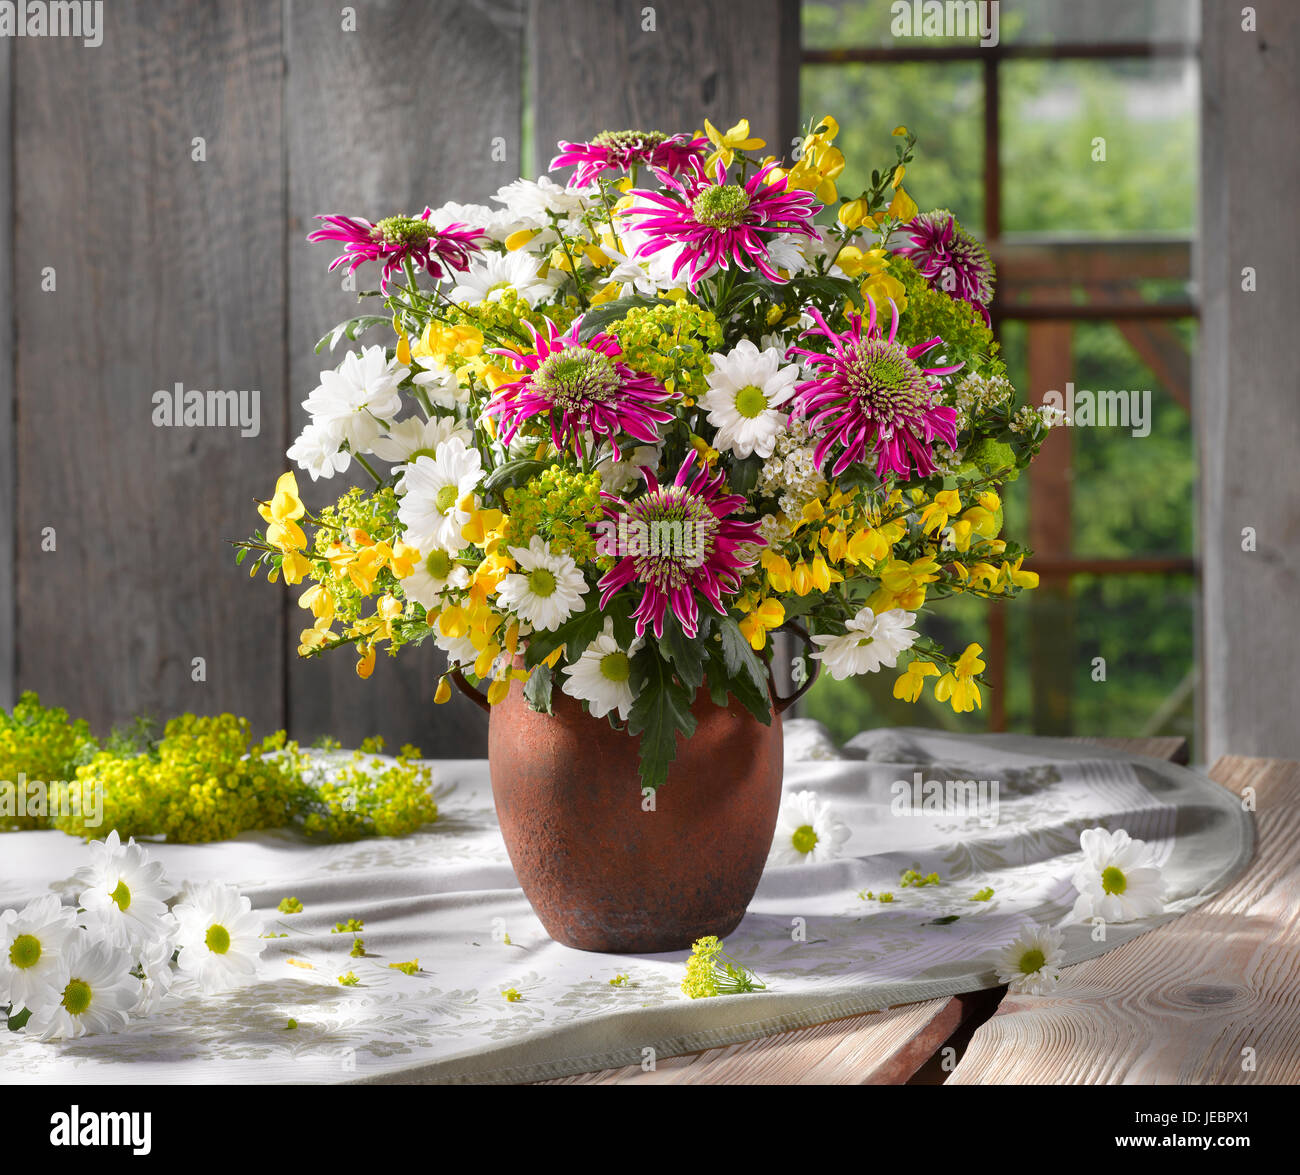 Bouquet of flowers with daisies. Stock Photo